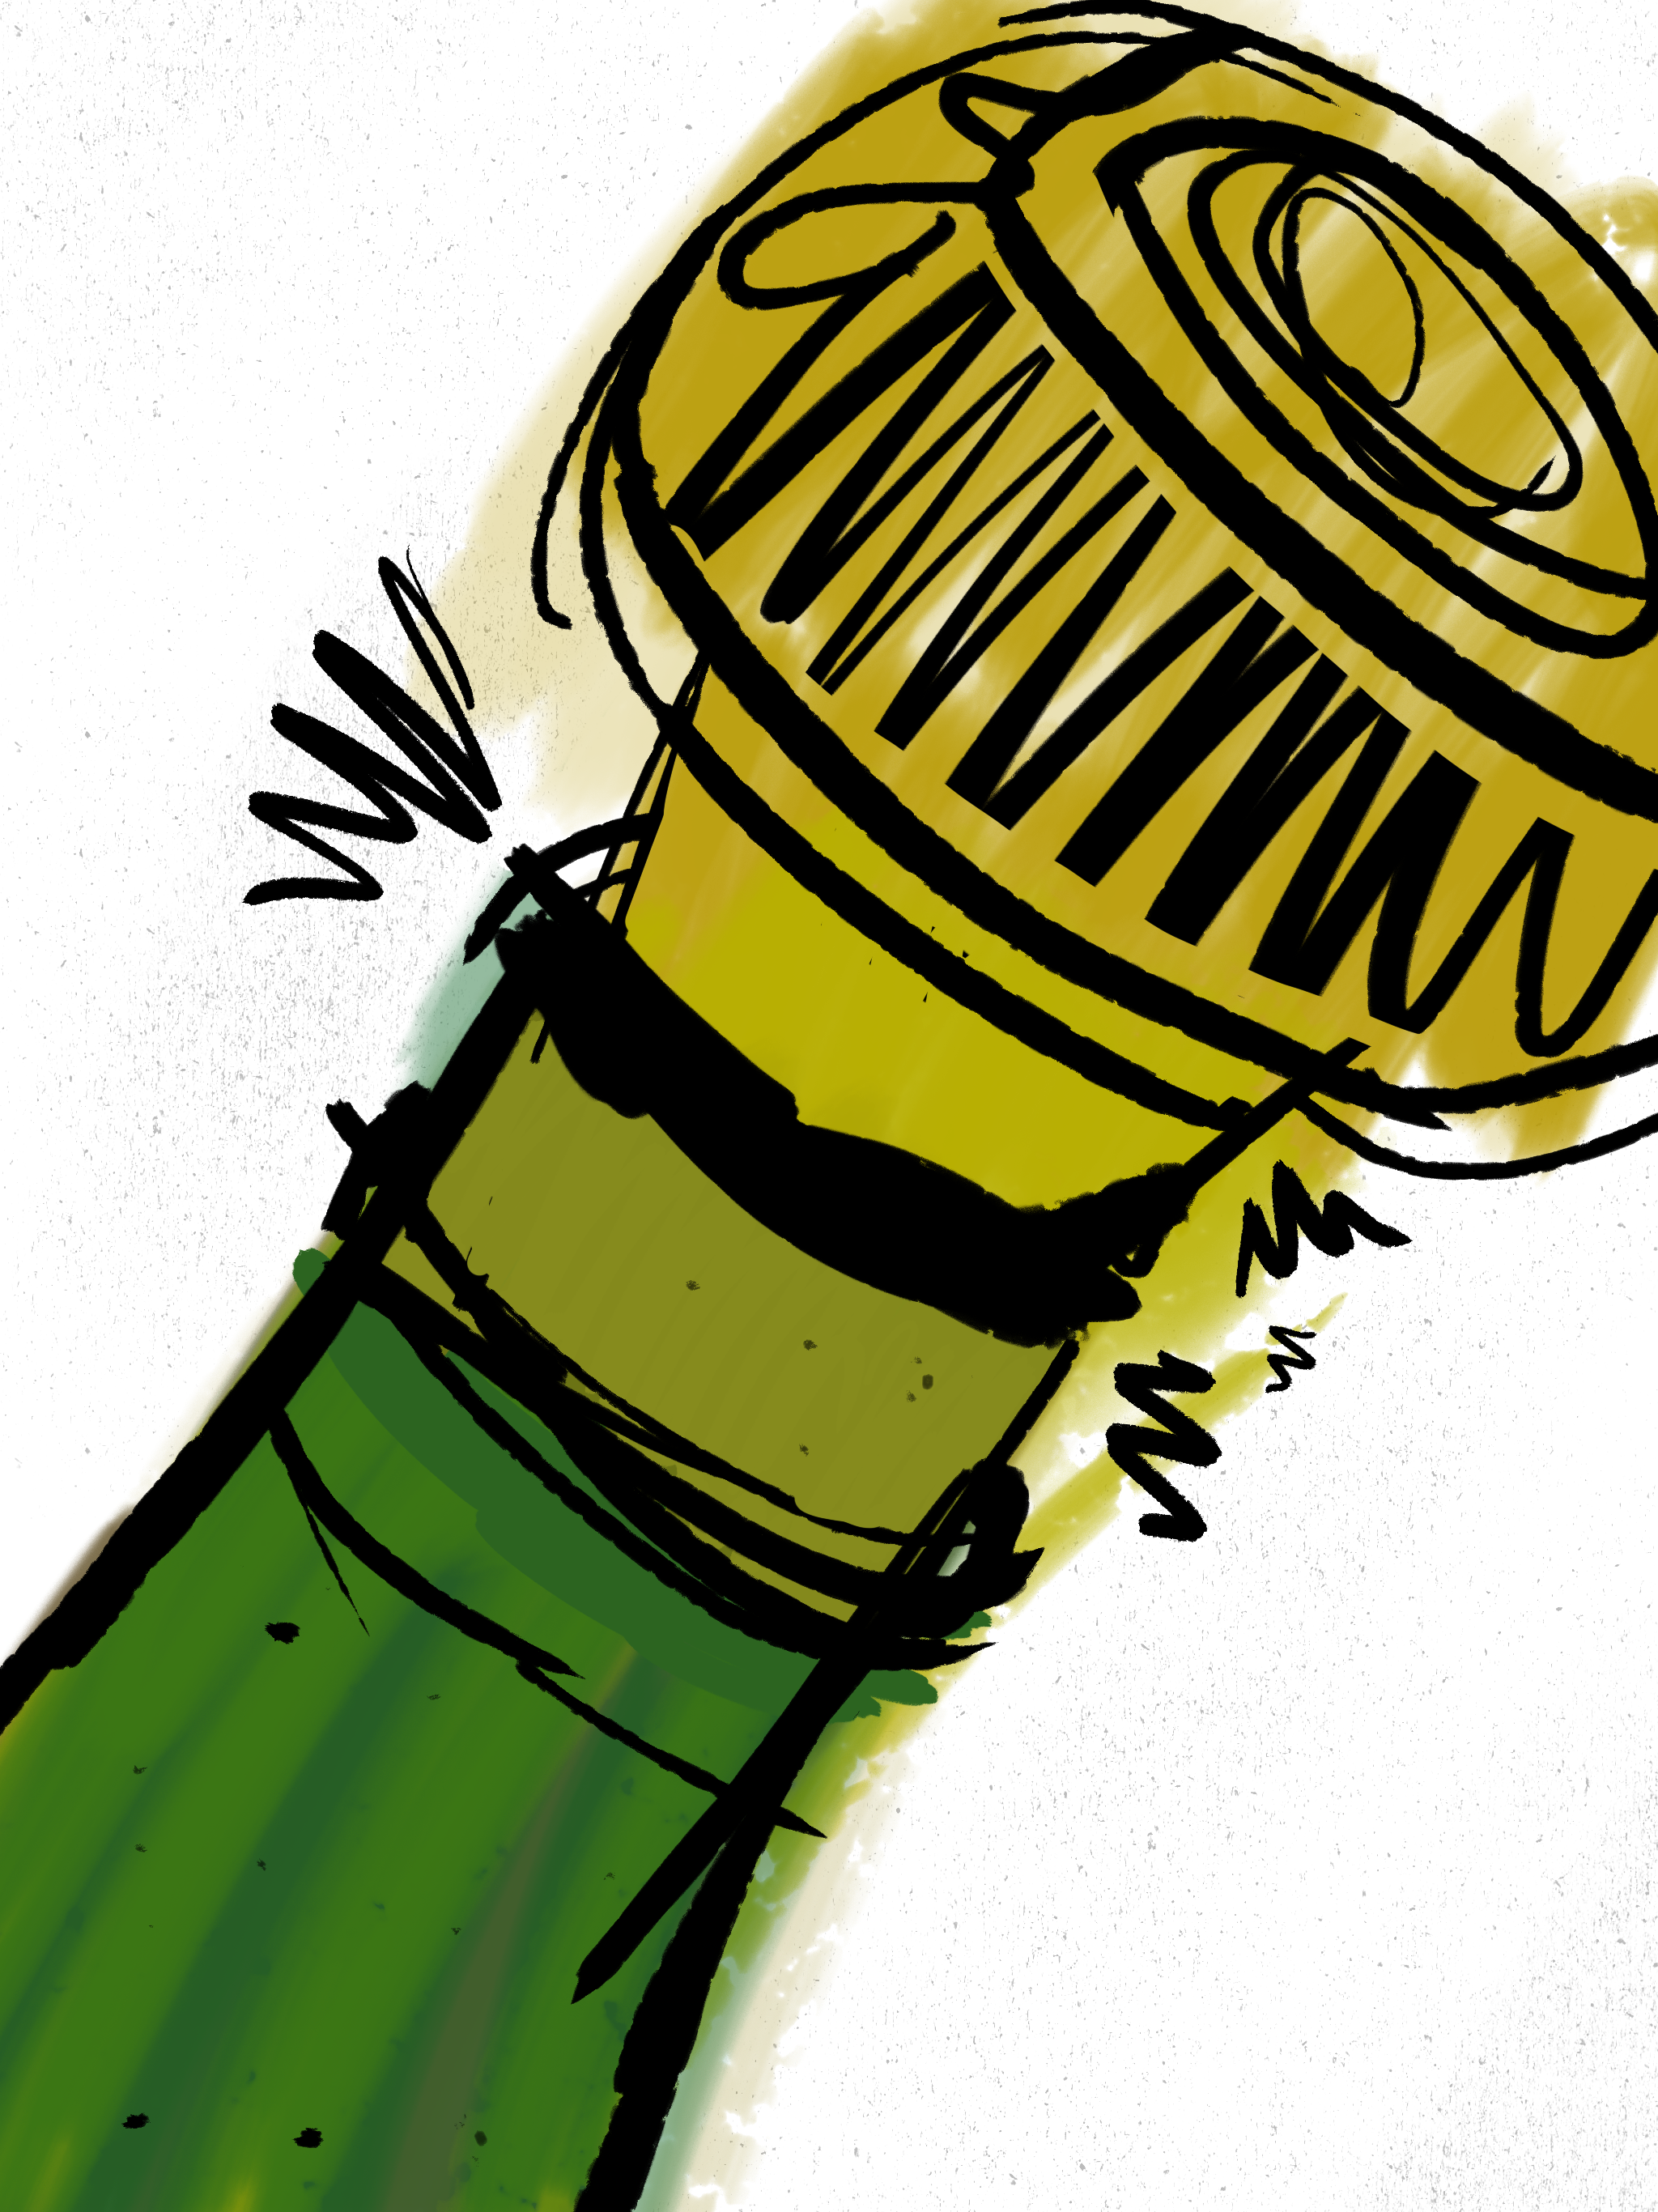 An expressive close up illustration in green and gold of a champagne cork